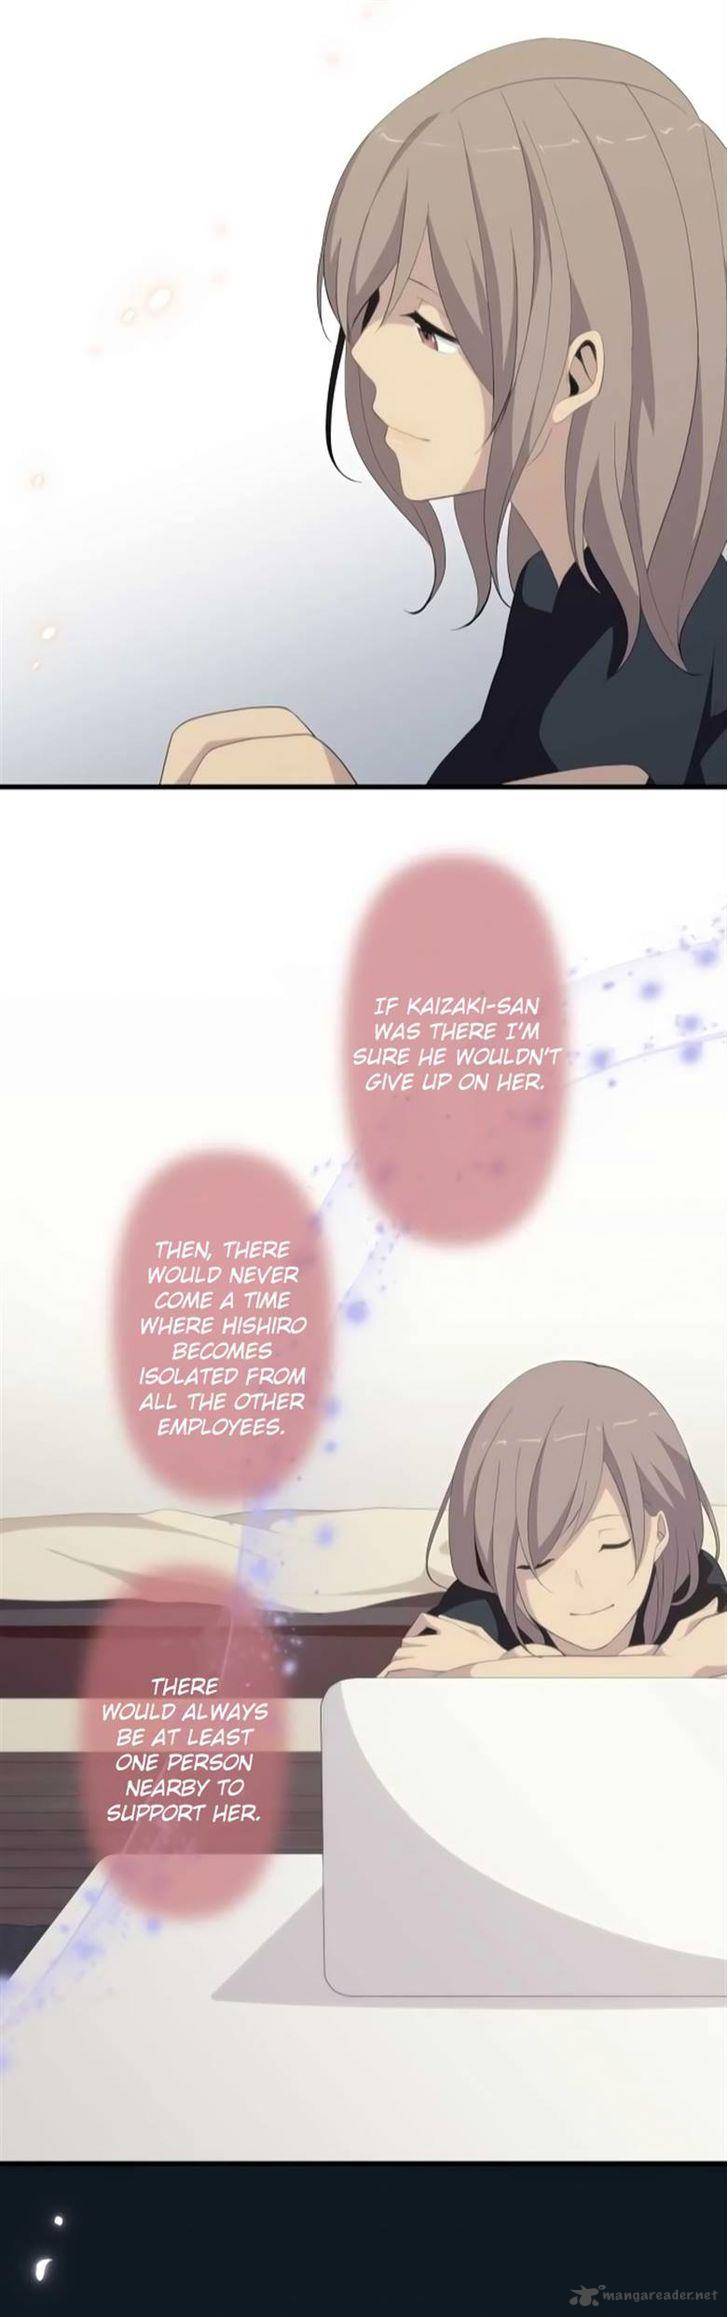 relife_131_23